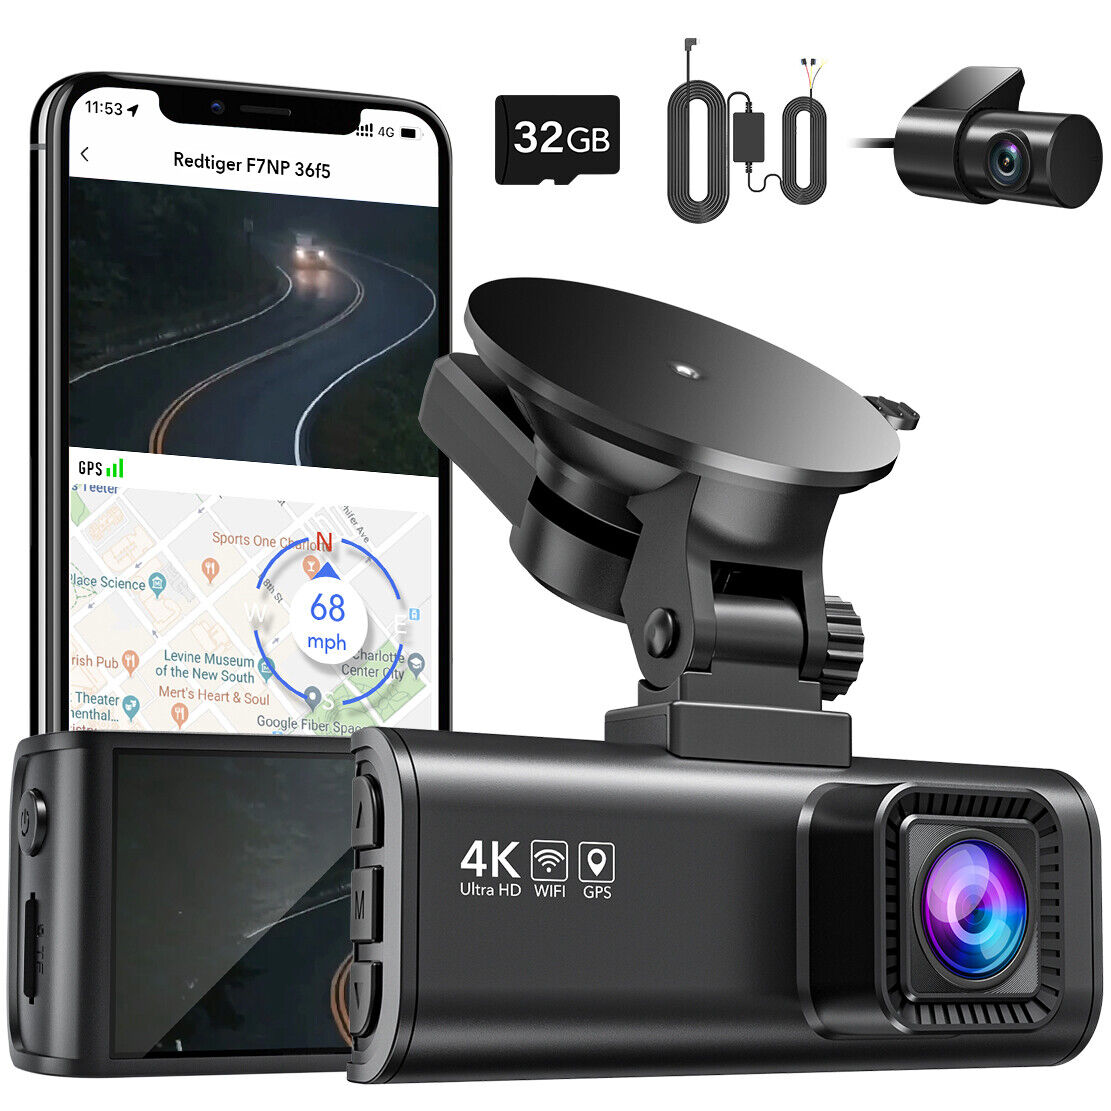 REDTIGER 4K Front and Rear Dash Cam Wifi GPS Dash Camera with Hardwire Kit